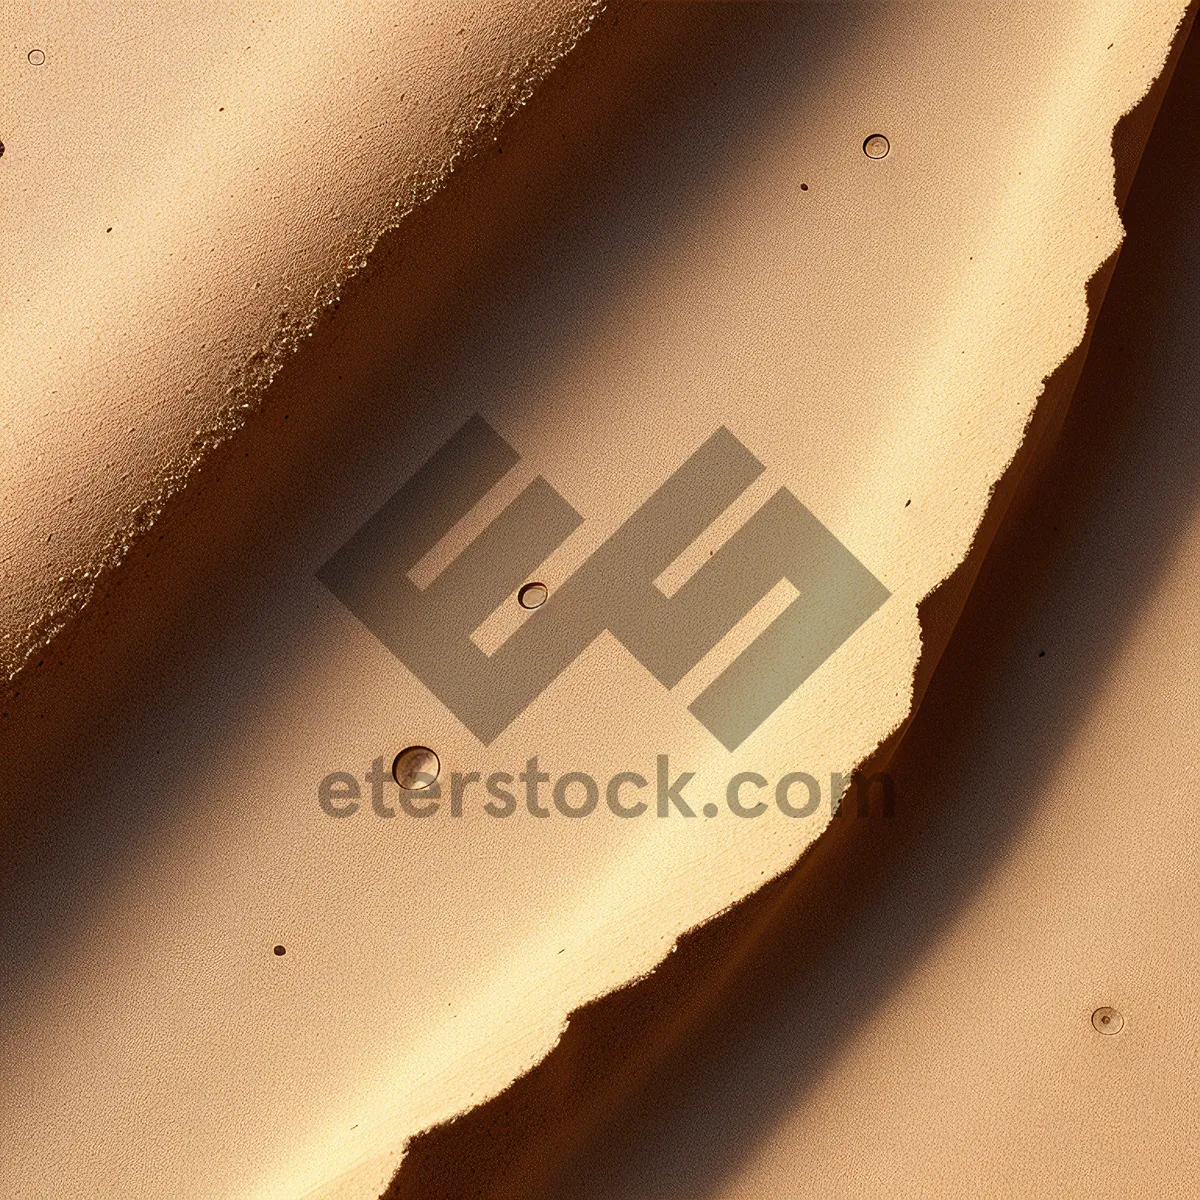 Picture of Ant crawling on textured grunge surface